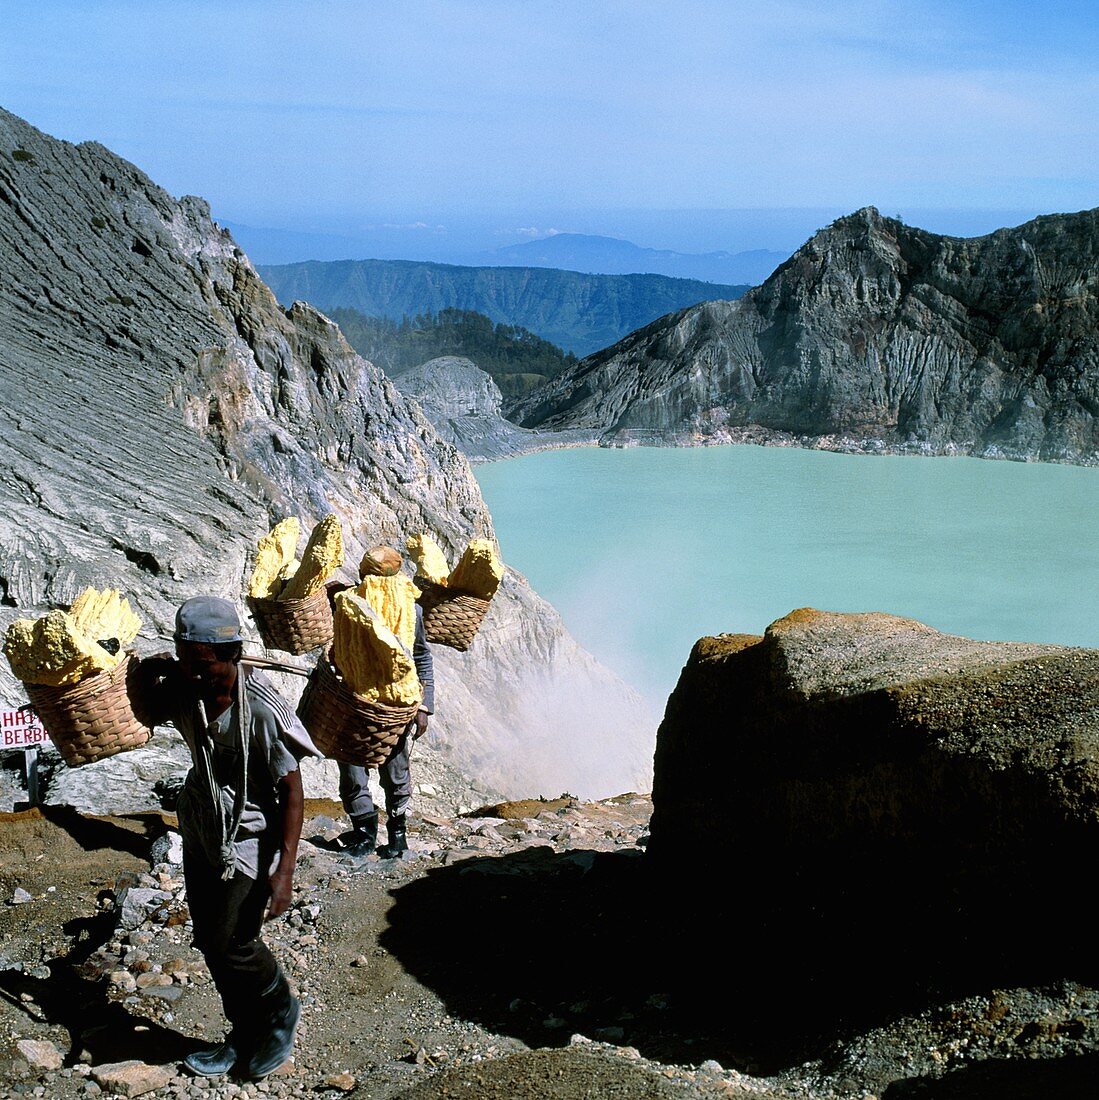 Men carrying mined sulphur from volcanic crater